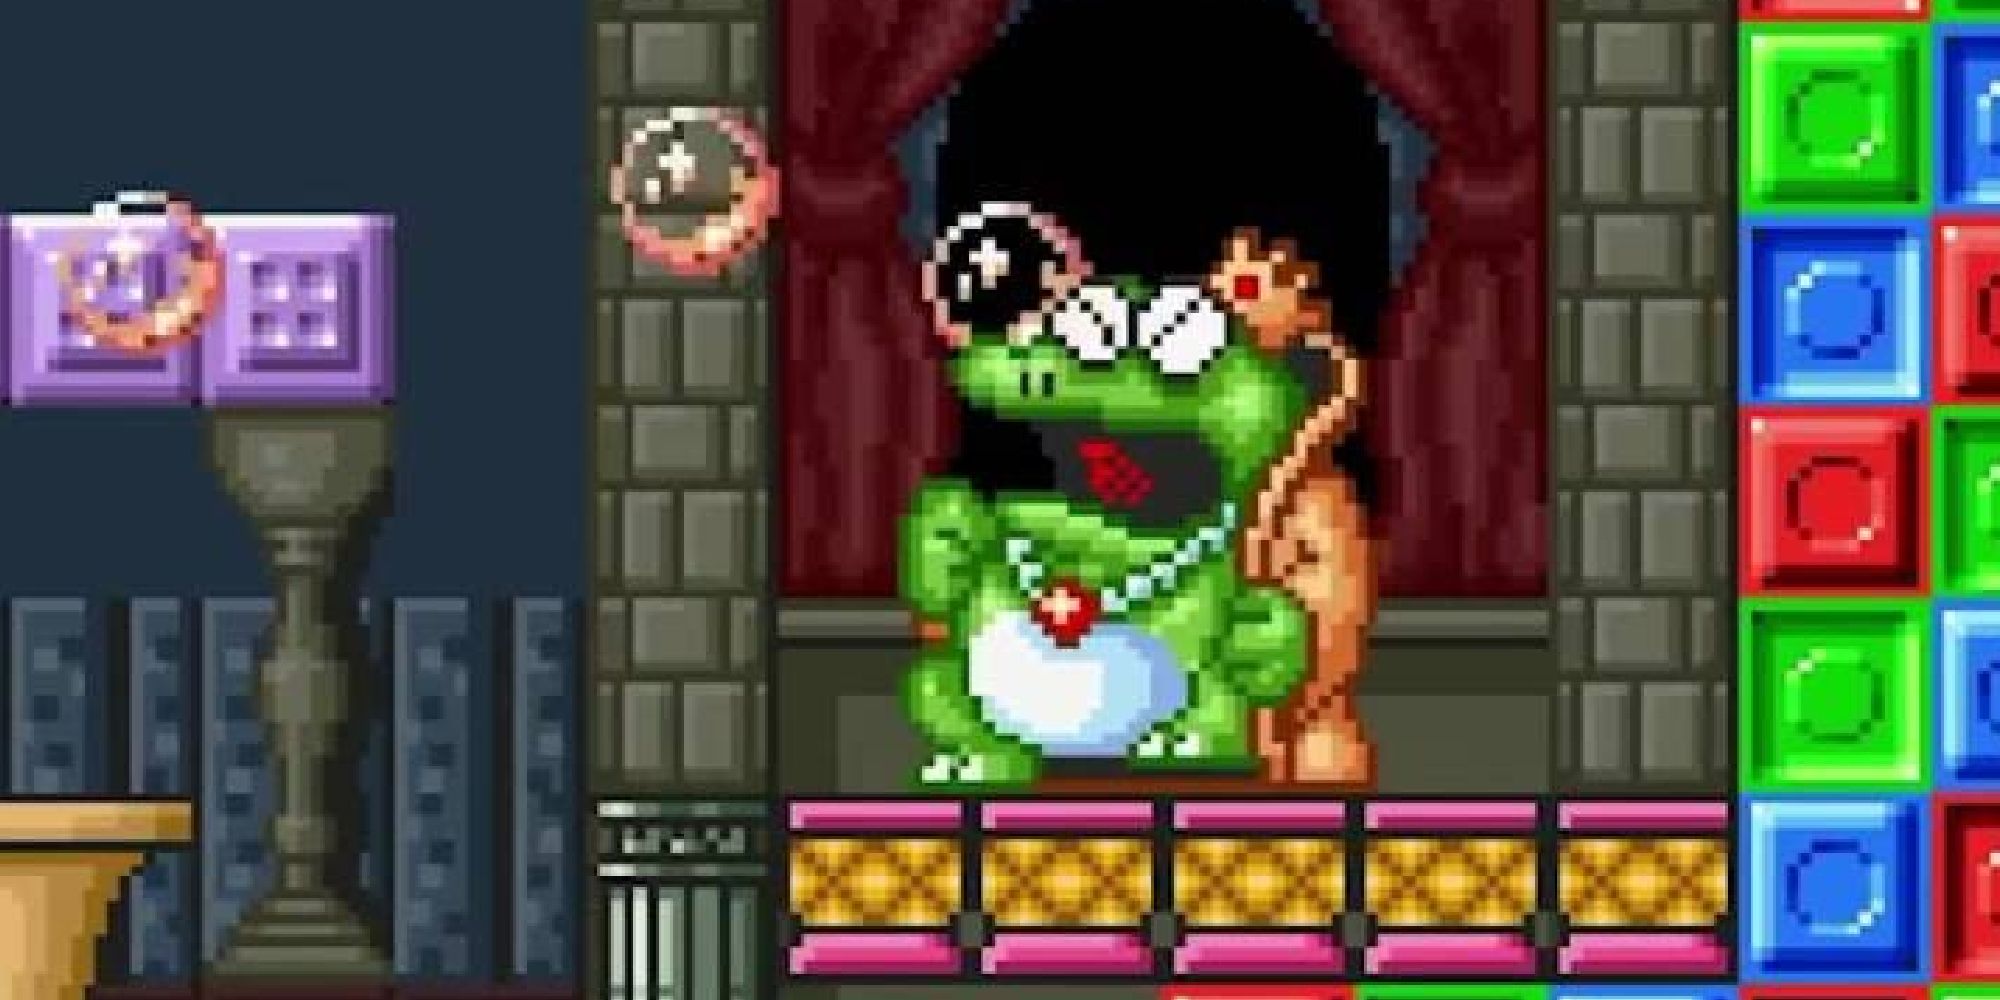 Wart burping bubbles in a remake of Super Mario Bros 2 on Gameboy Advance